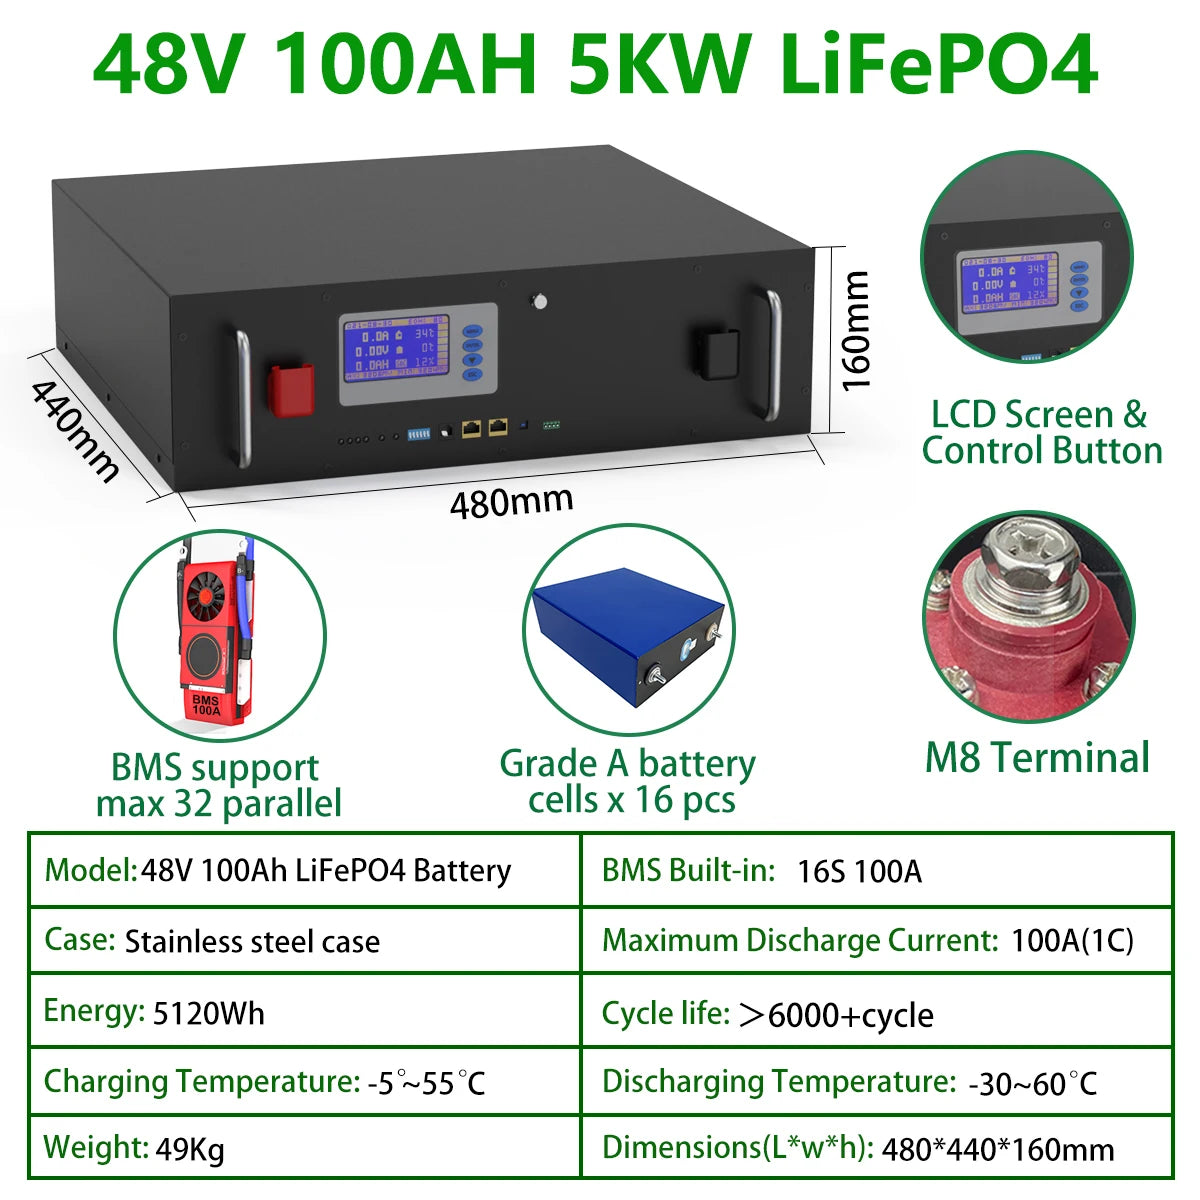 LiFePO4 48V 100AH Battery, High-performance LiFePO4 battery pack for home energy storage systems.